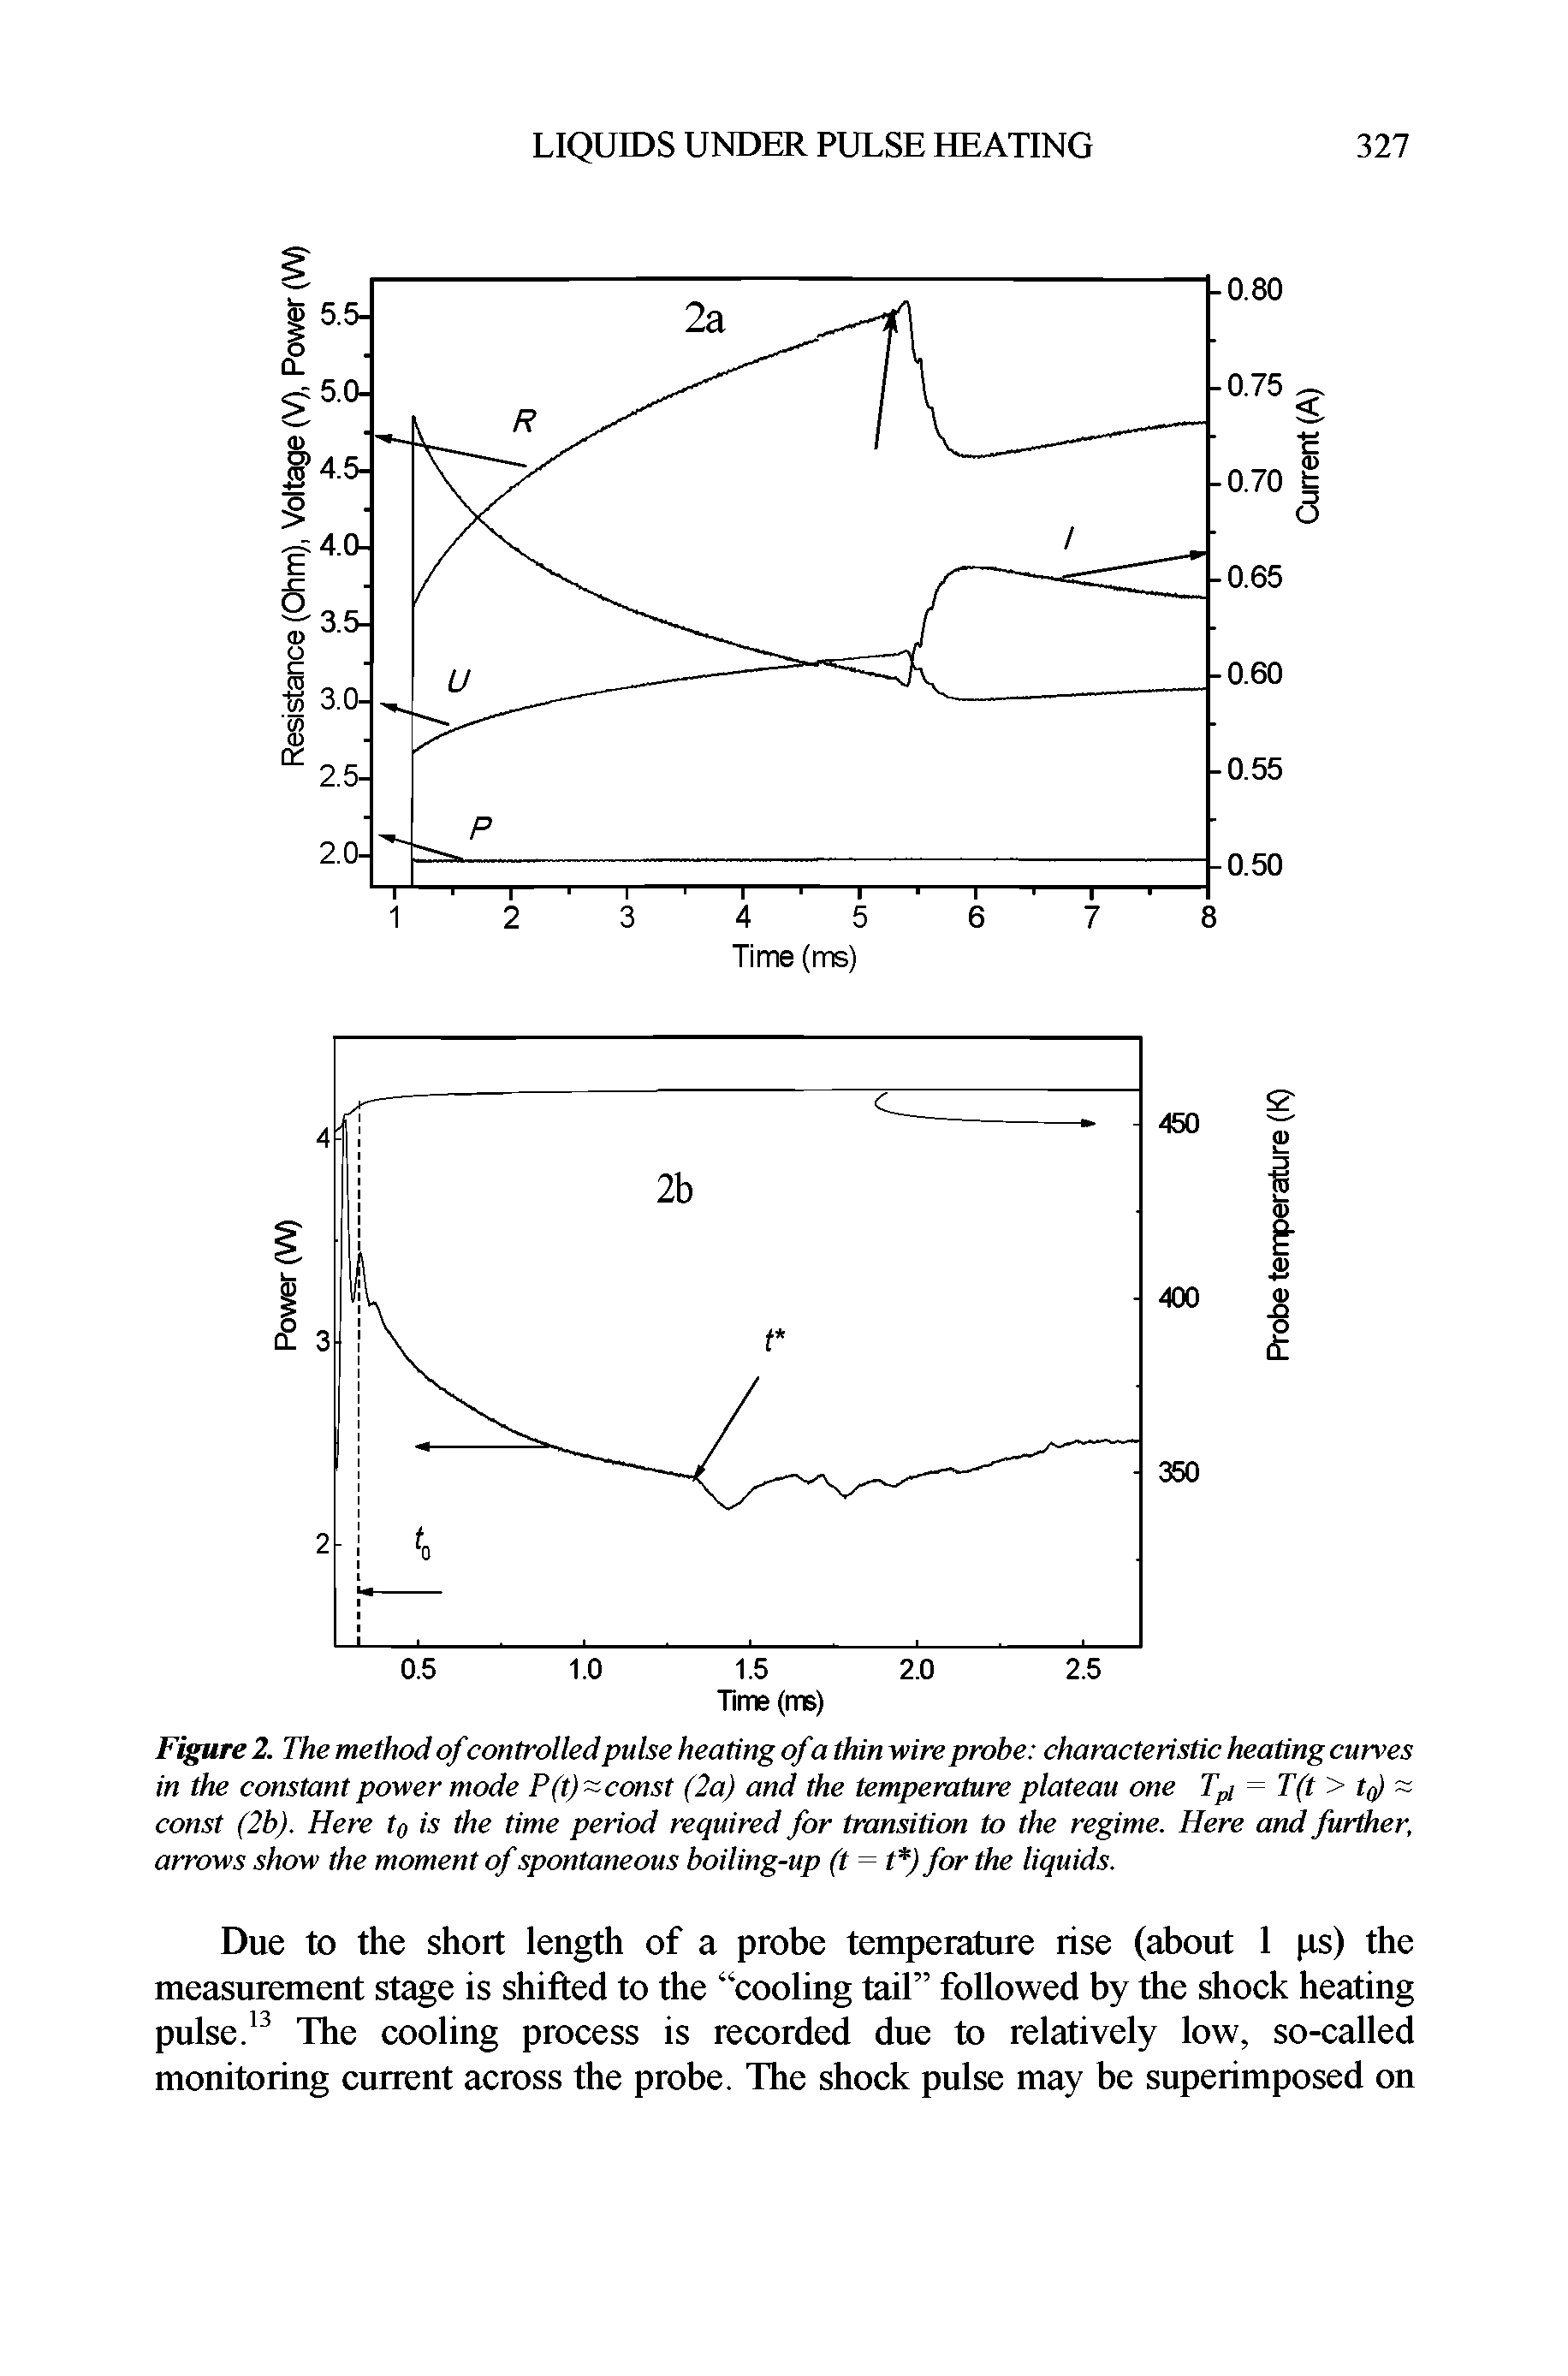 Figure 2. The method ofcontrolled pulse heating ofa thin wire probe characteristic heating curves in the constant power mode P(t)-const (2a) and the temperature plateau one Tpi = T(t > tg) -const (2b). Here tg is the time period required for transition to the regime. Here ami further, arrows show the moment of spontaneous boiling-up (t = t ) for the liquids.